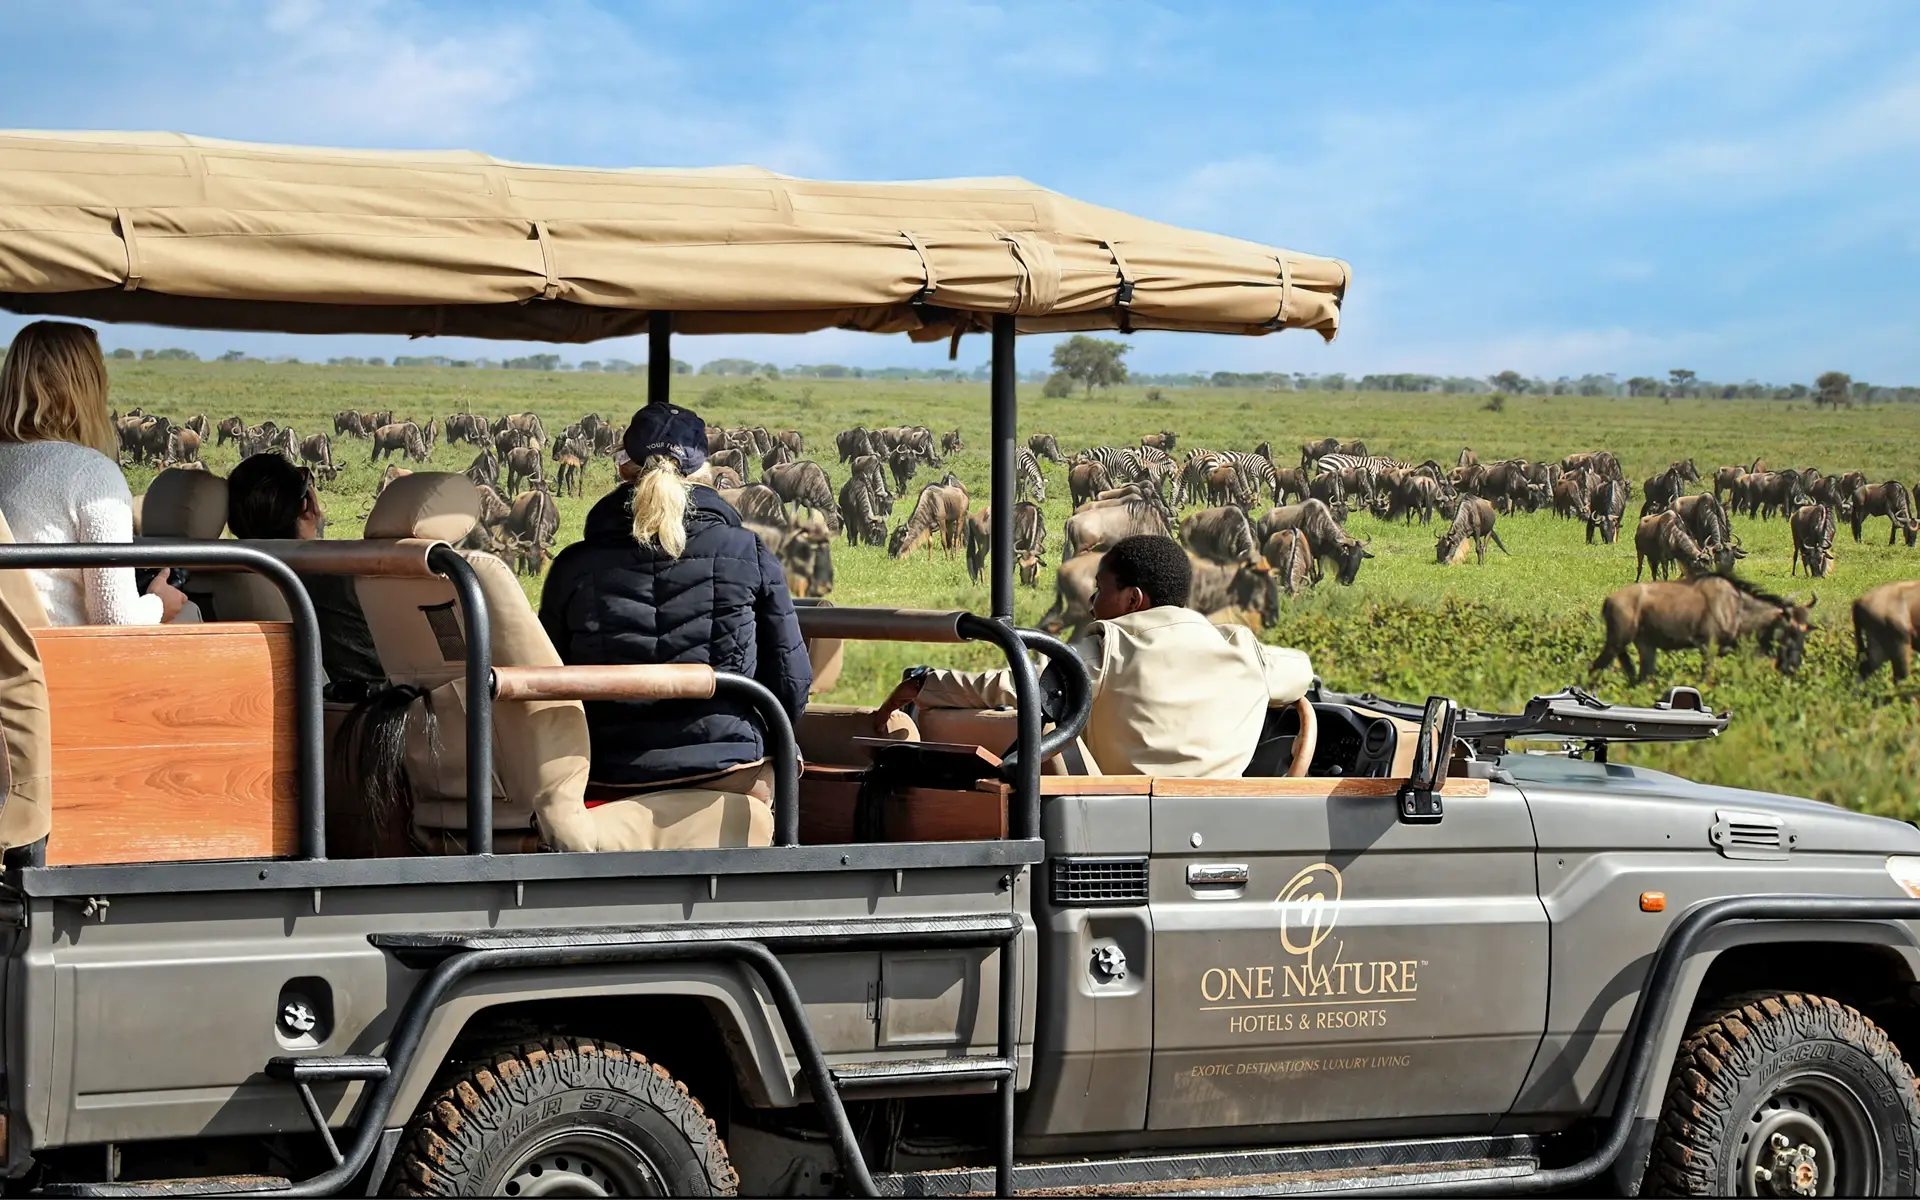 Guests enjoying the grazers on The Great Migration